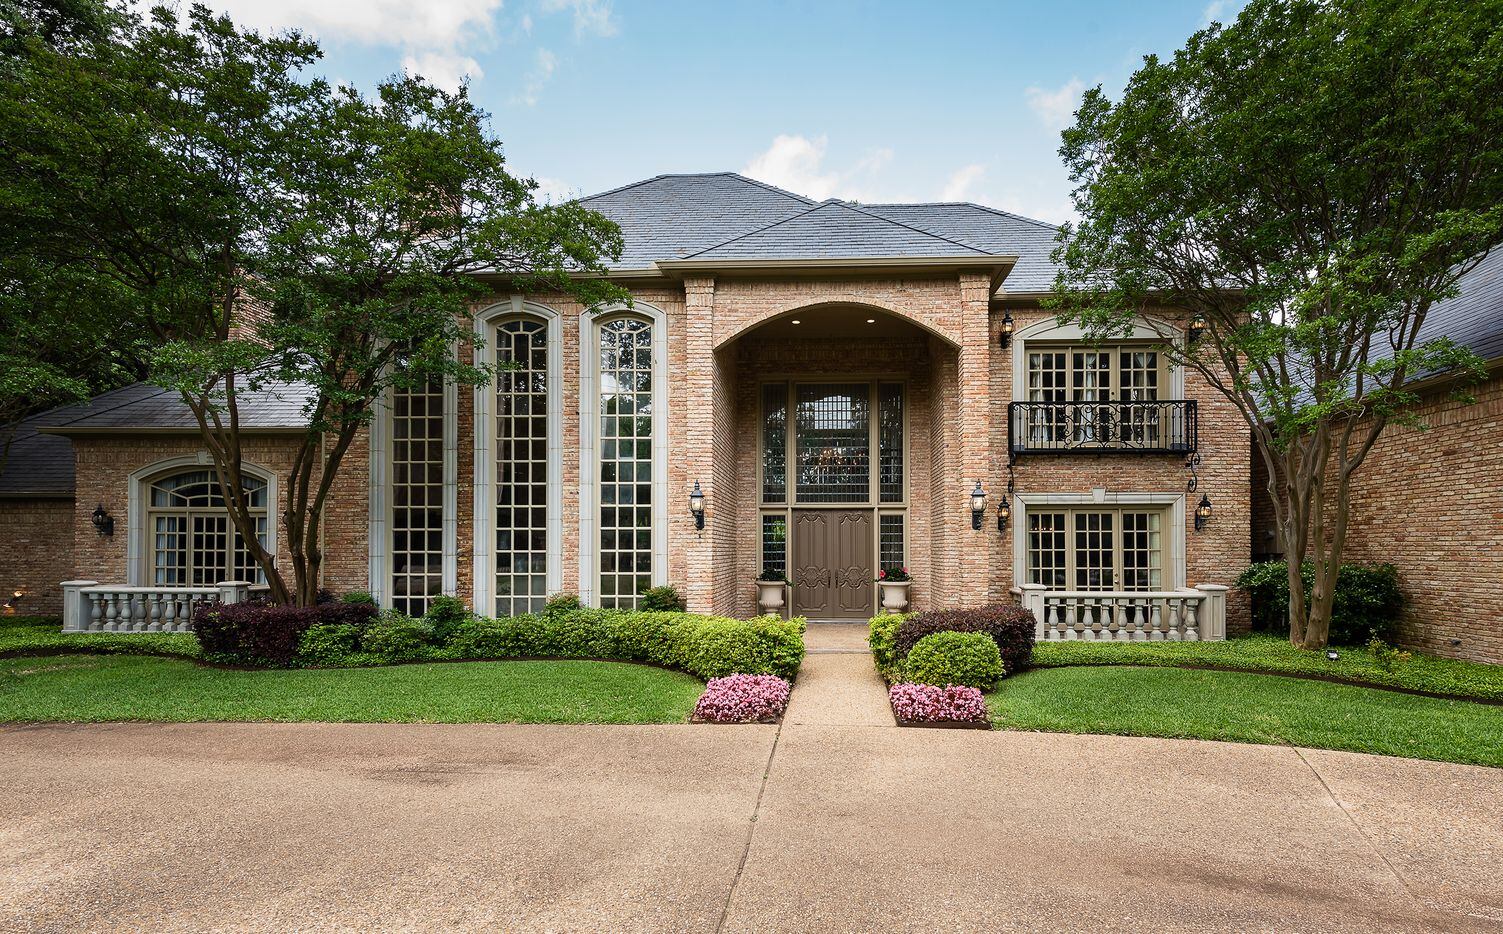 Take at the exterior of the house at 9441 Hollow Way Road in Dallas, TX.